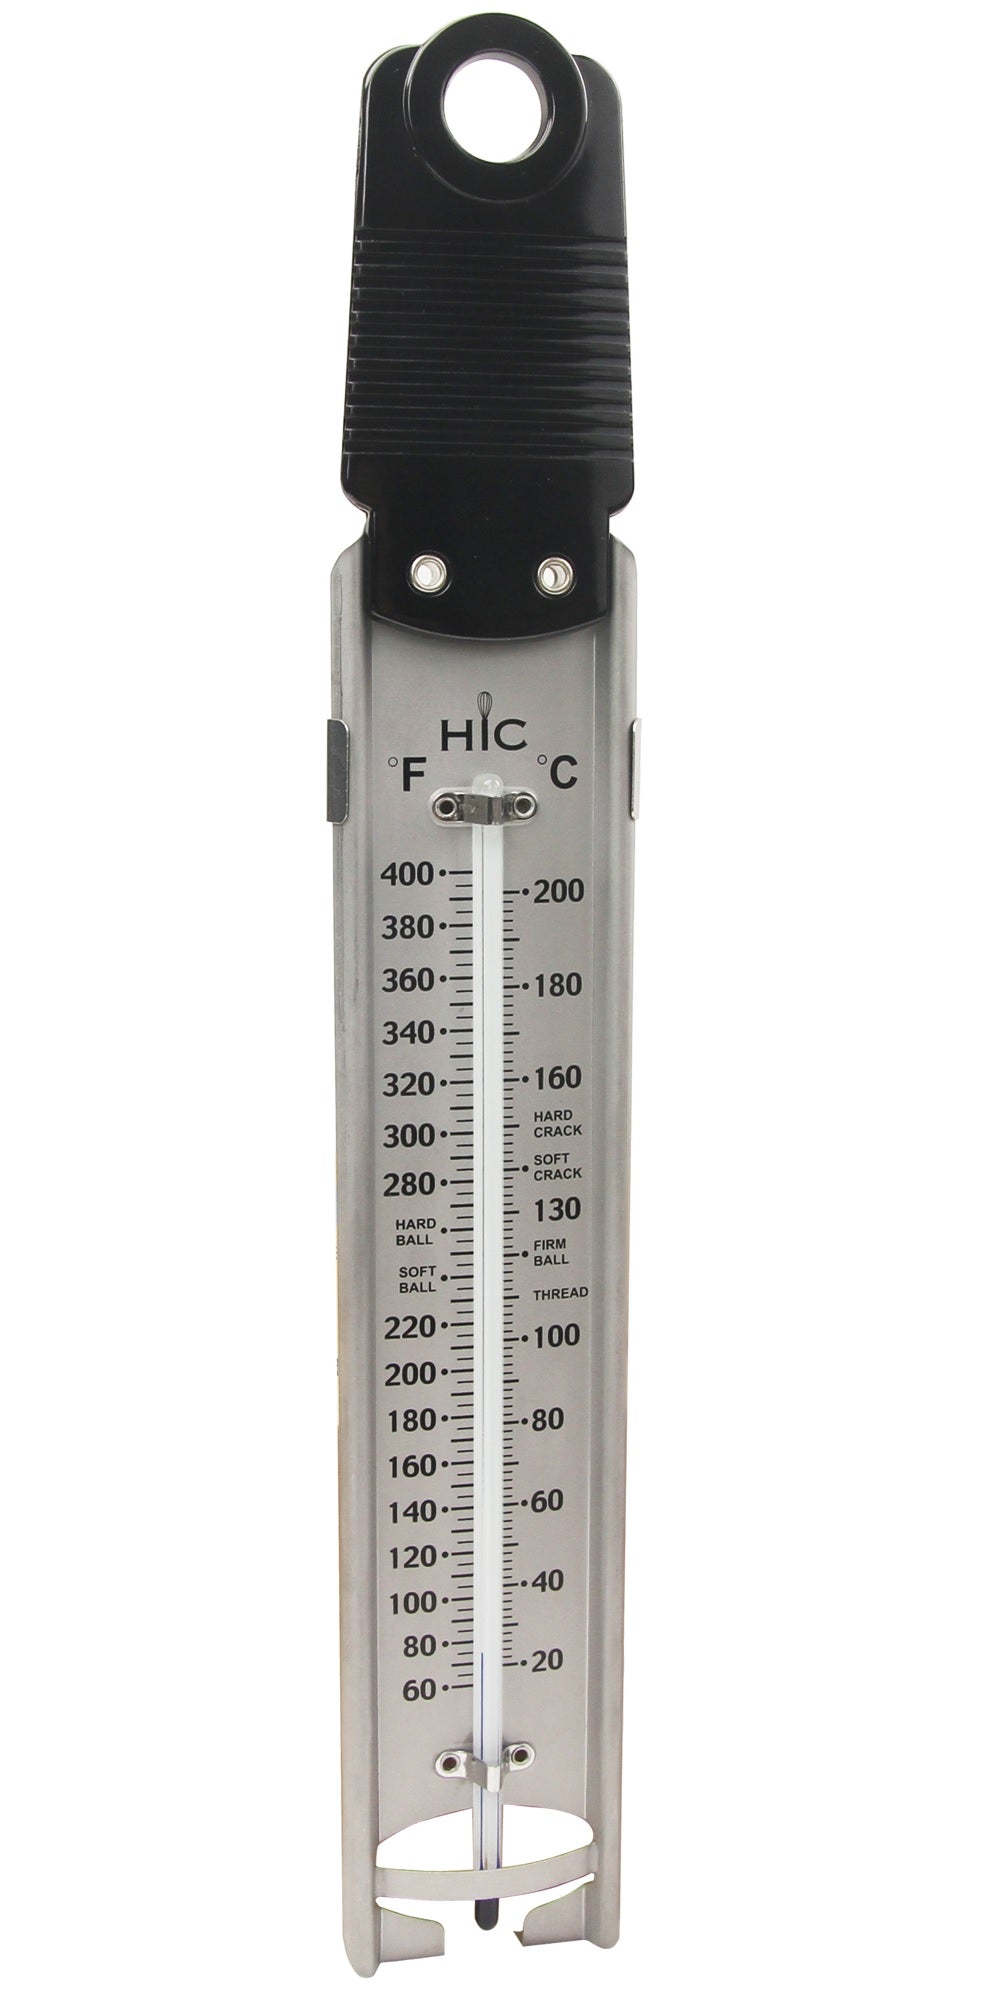 Harold Import 29004 Candy/Jelly/Deep Fry Thermometer, Stainless Steel